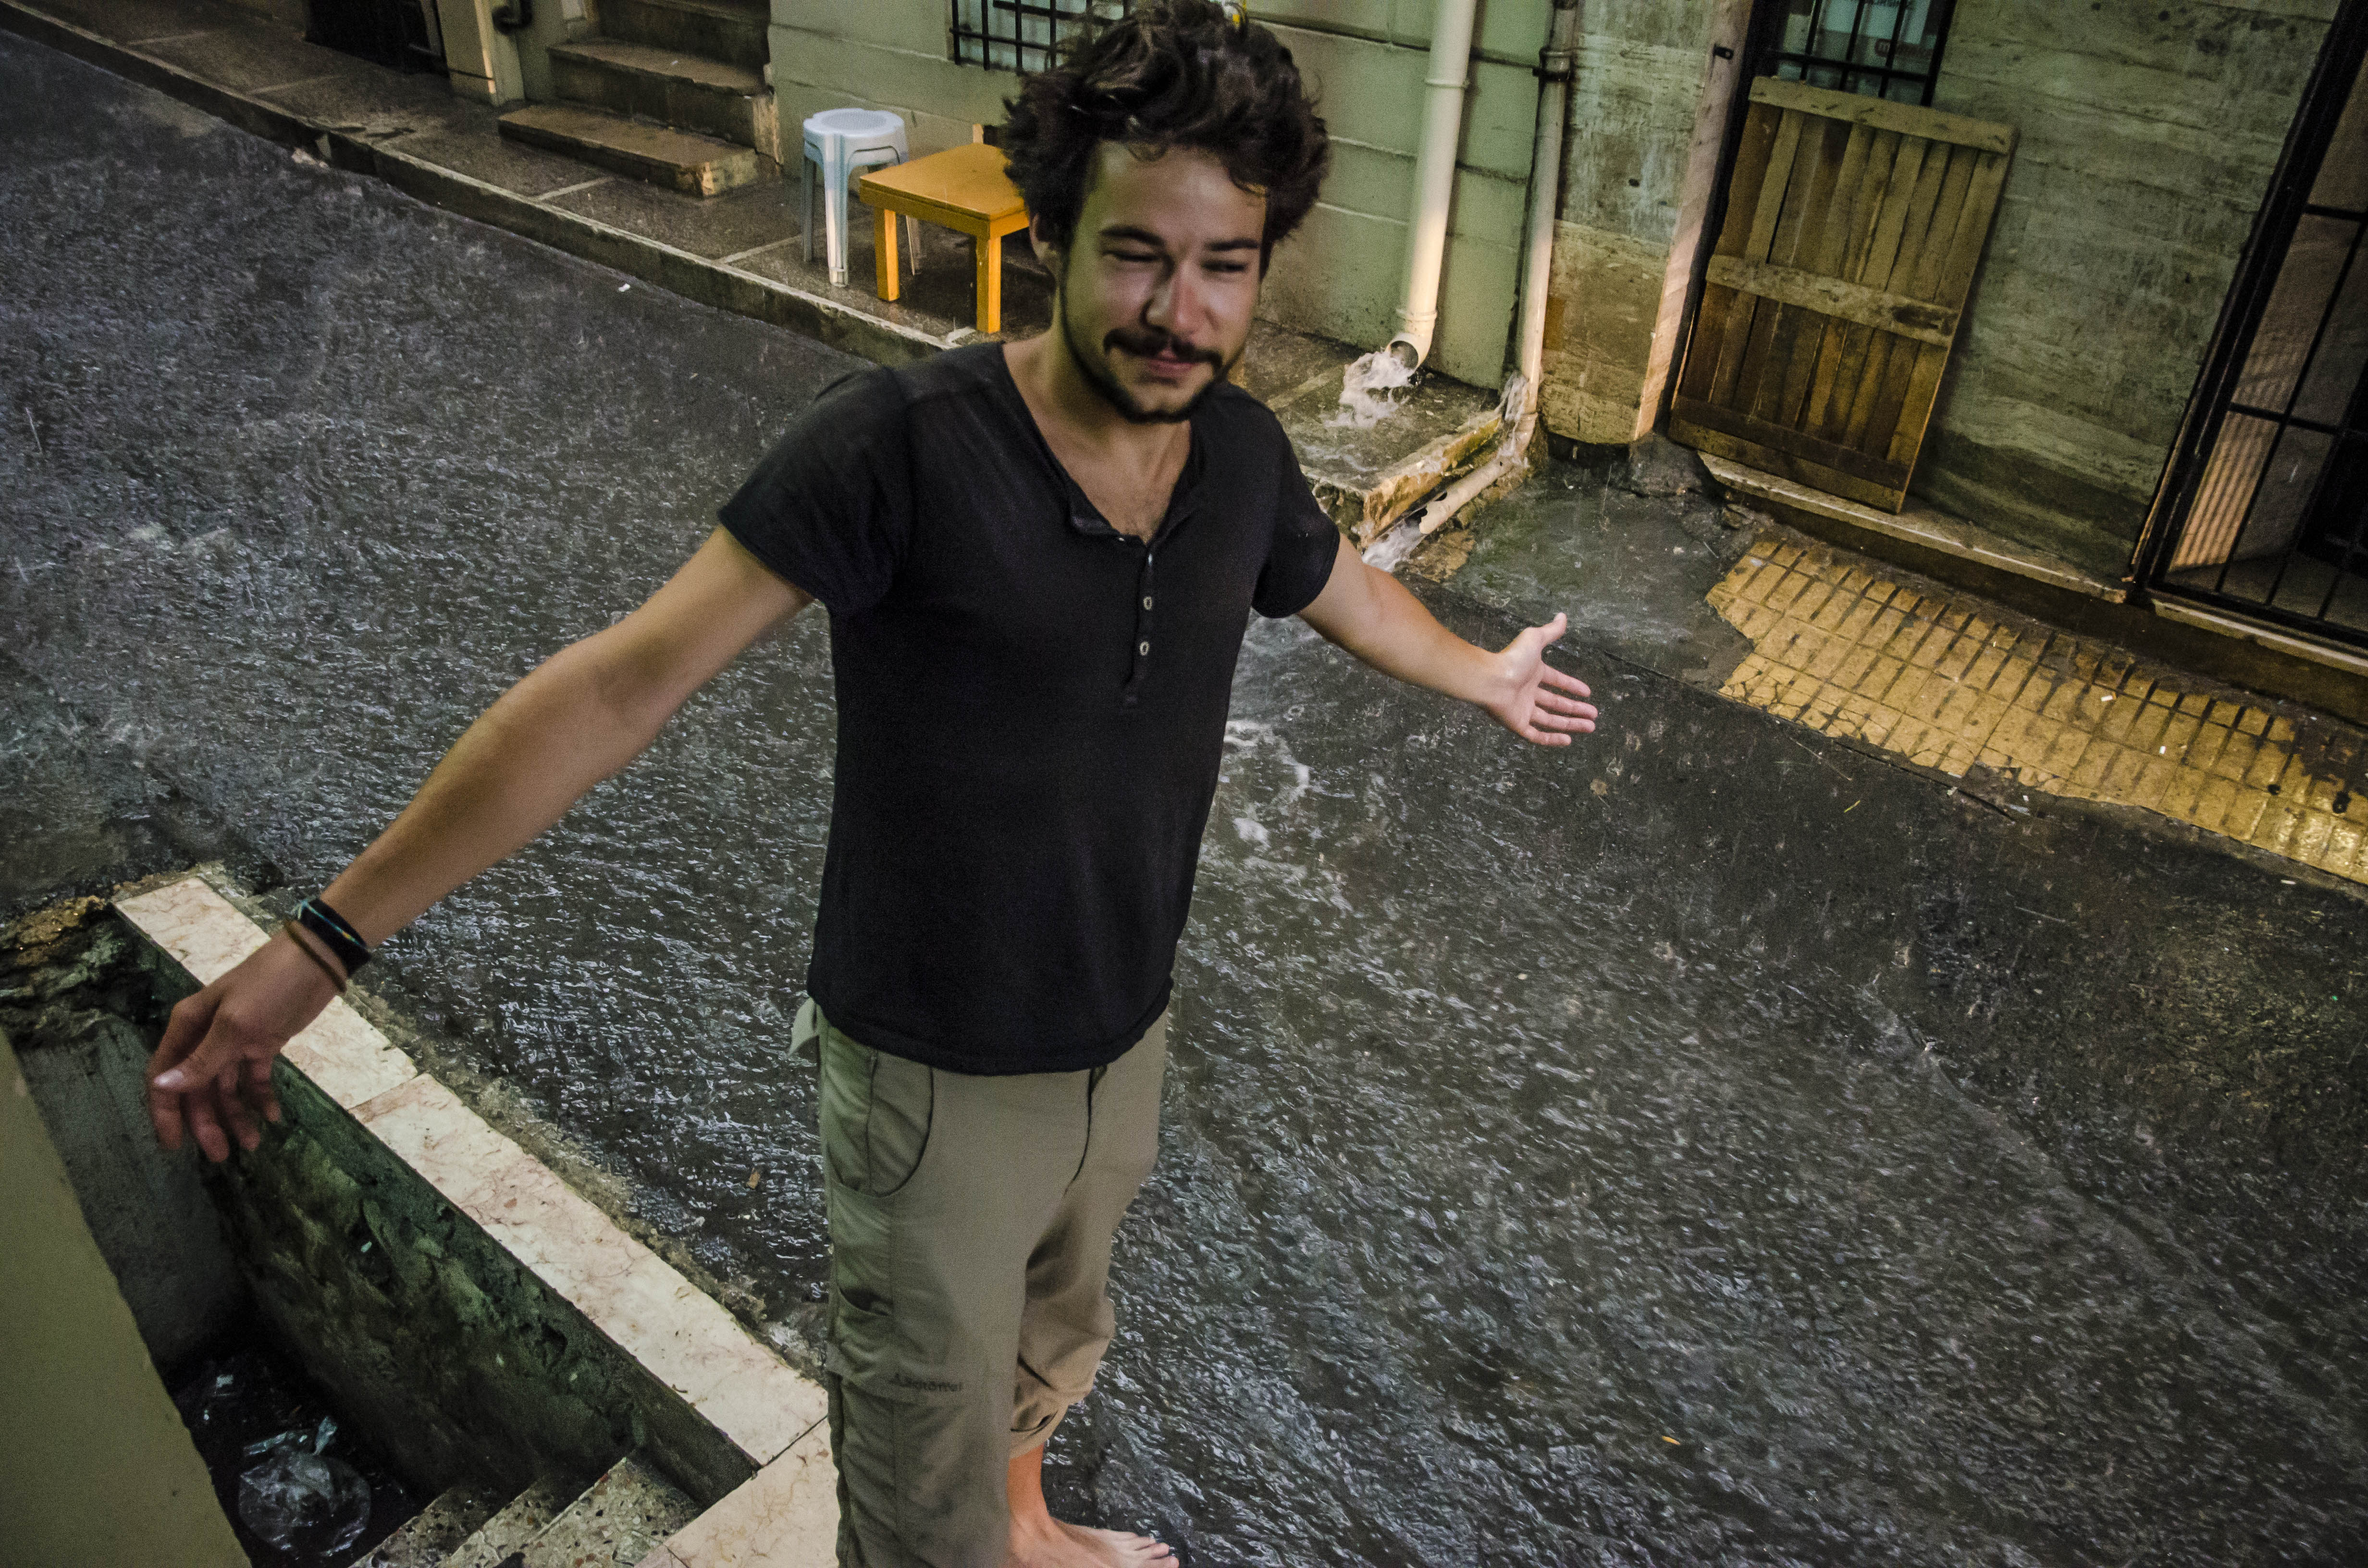 Galata West hostel, and the rain came